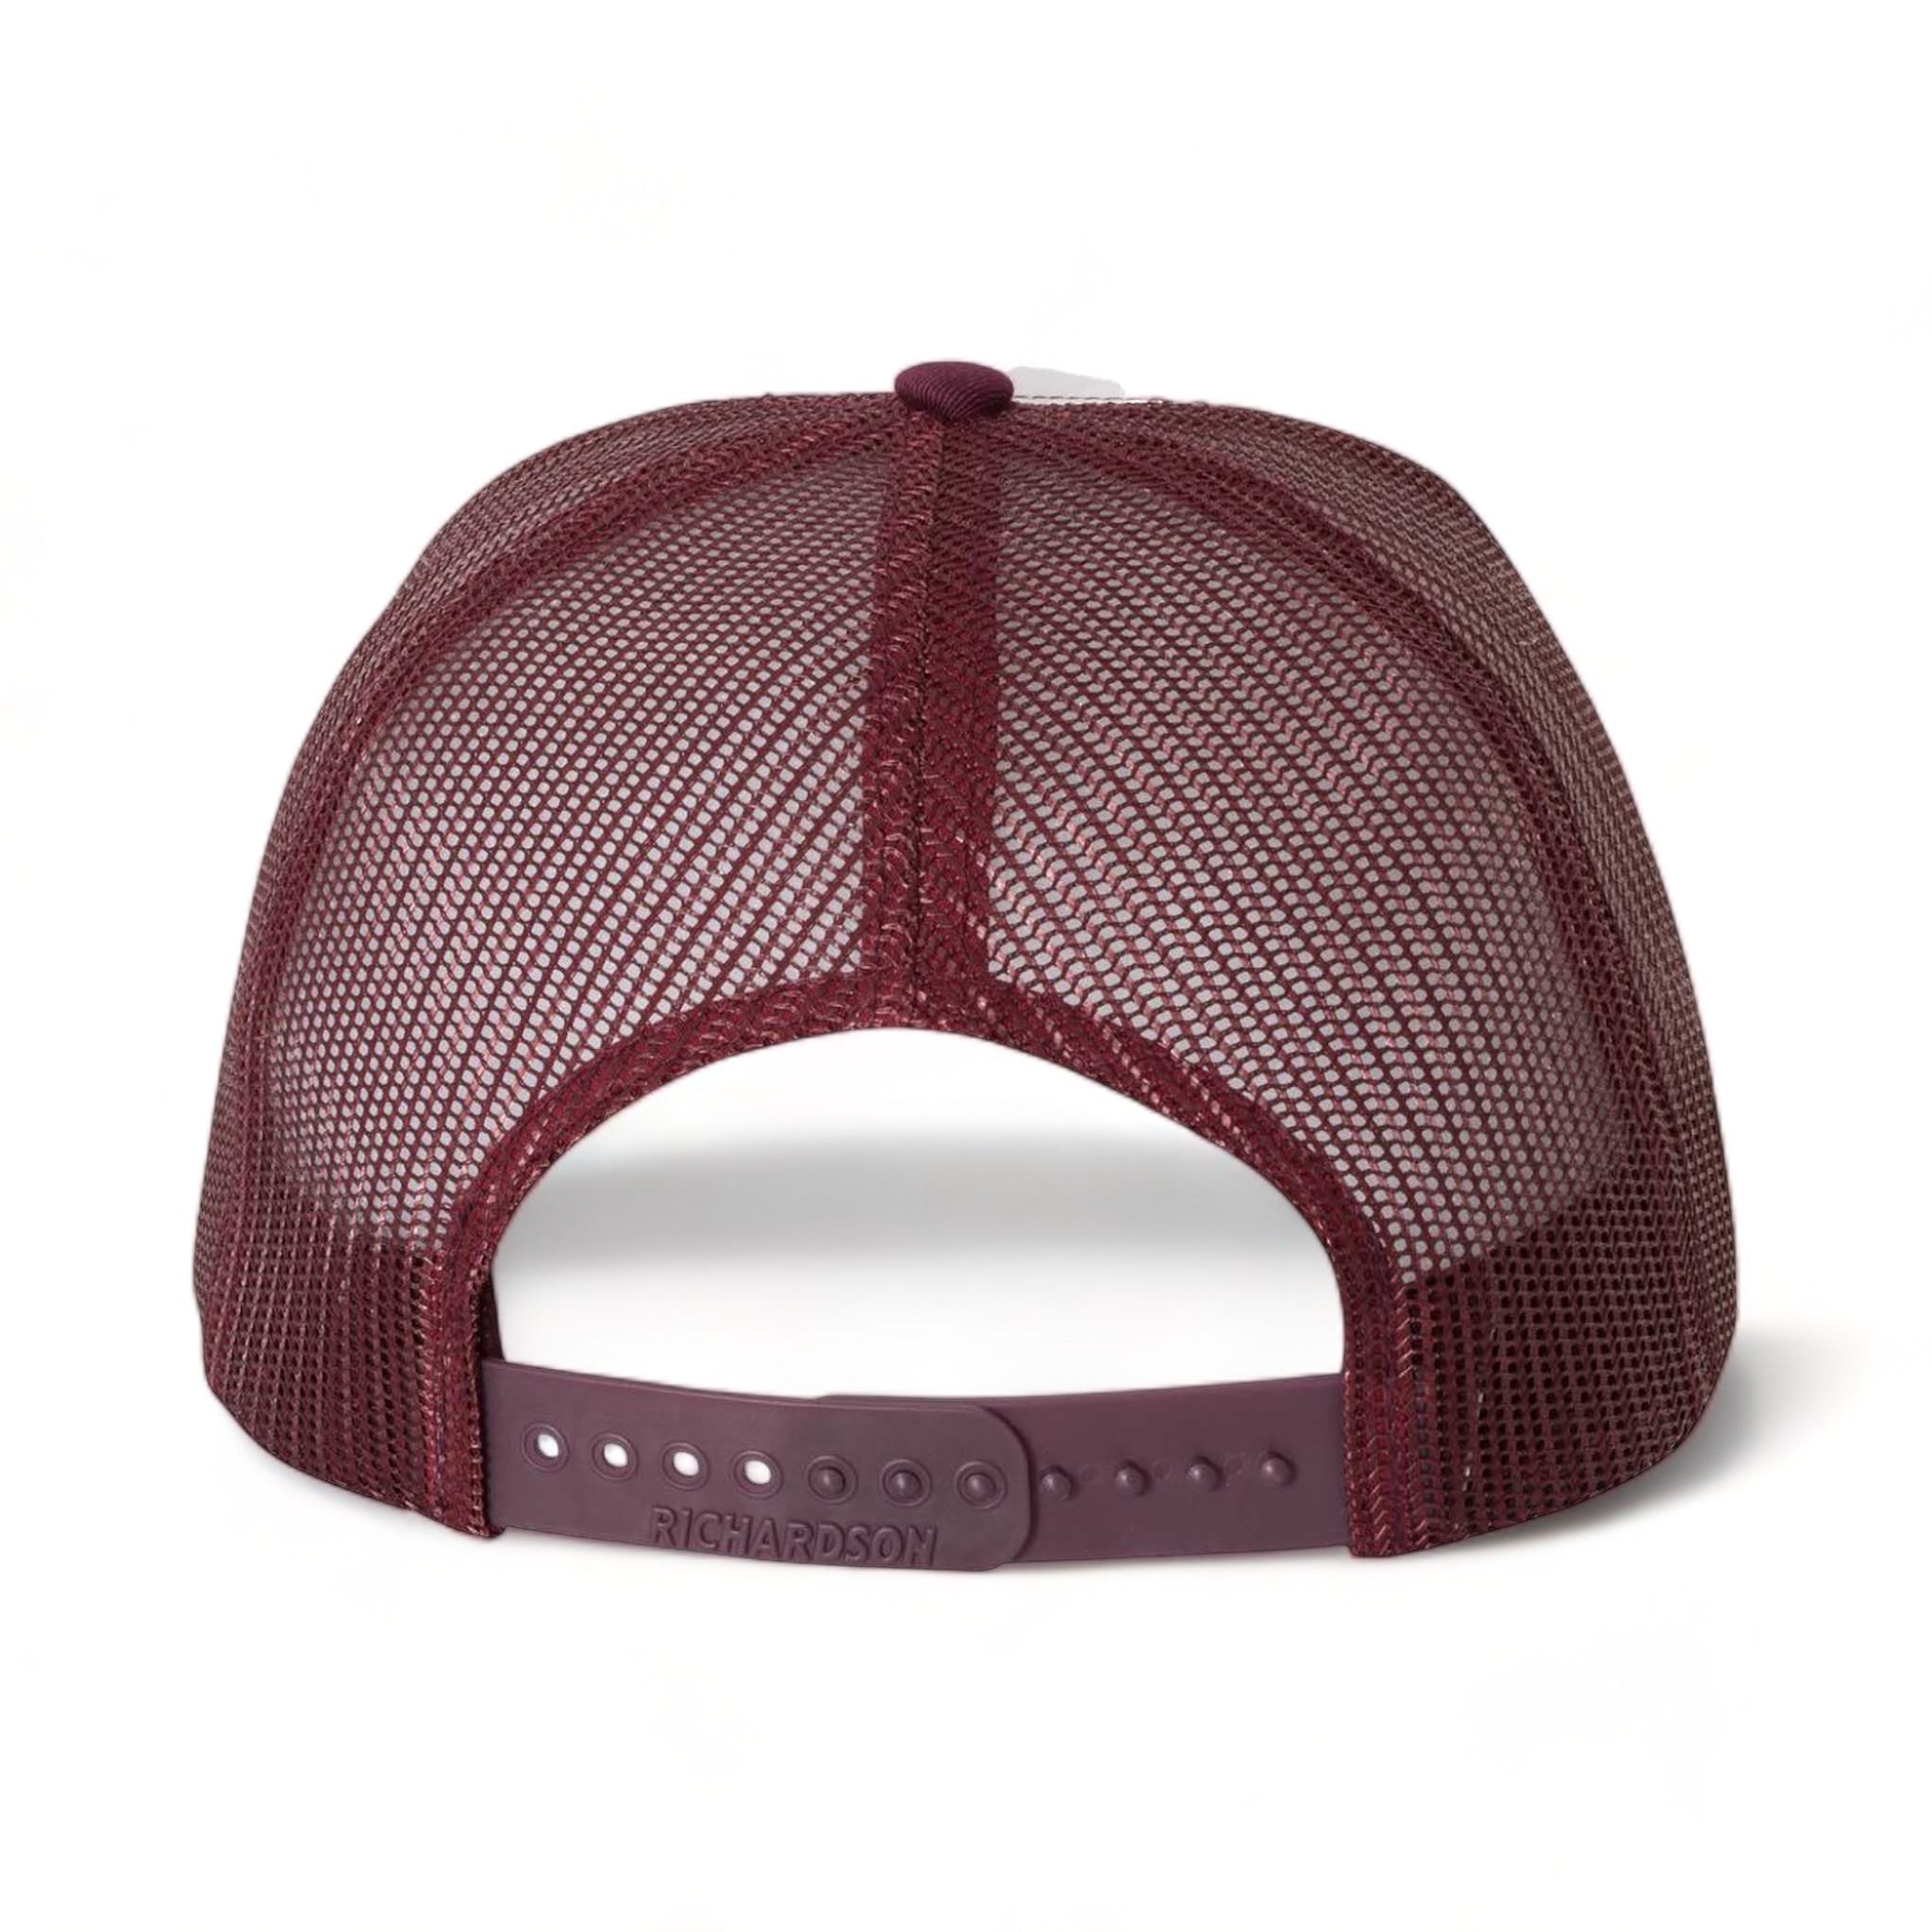 Back view of Richardson 112 custom hat in white and maroon